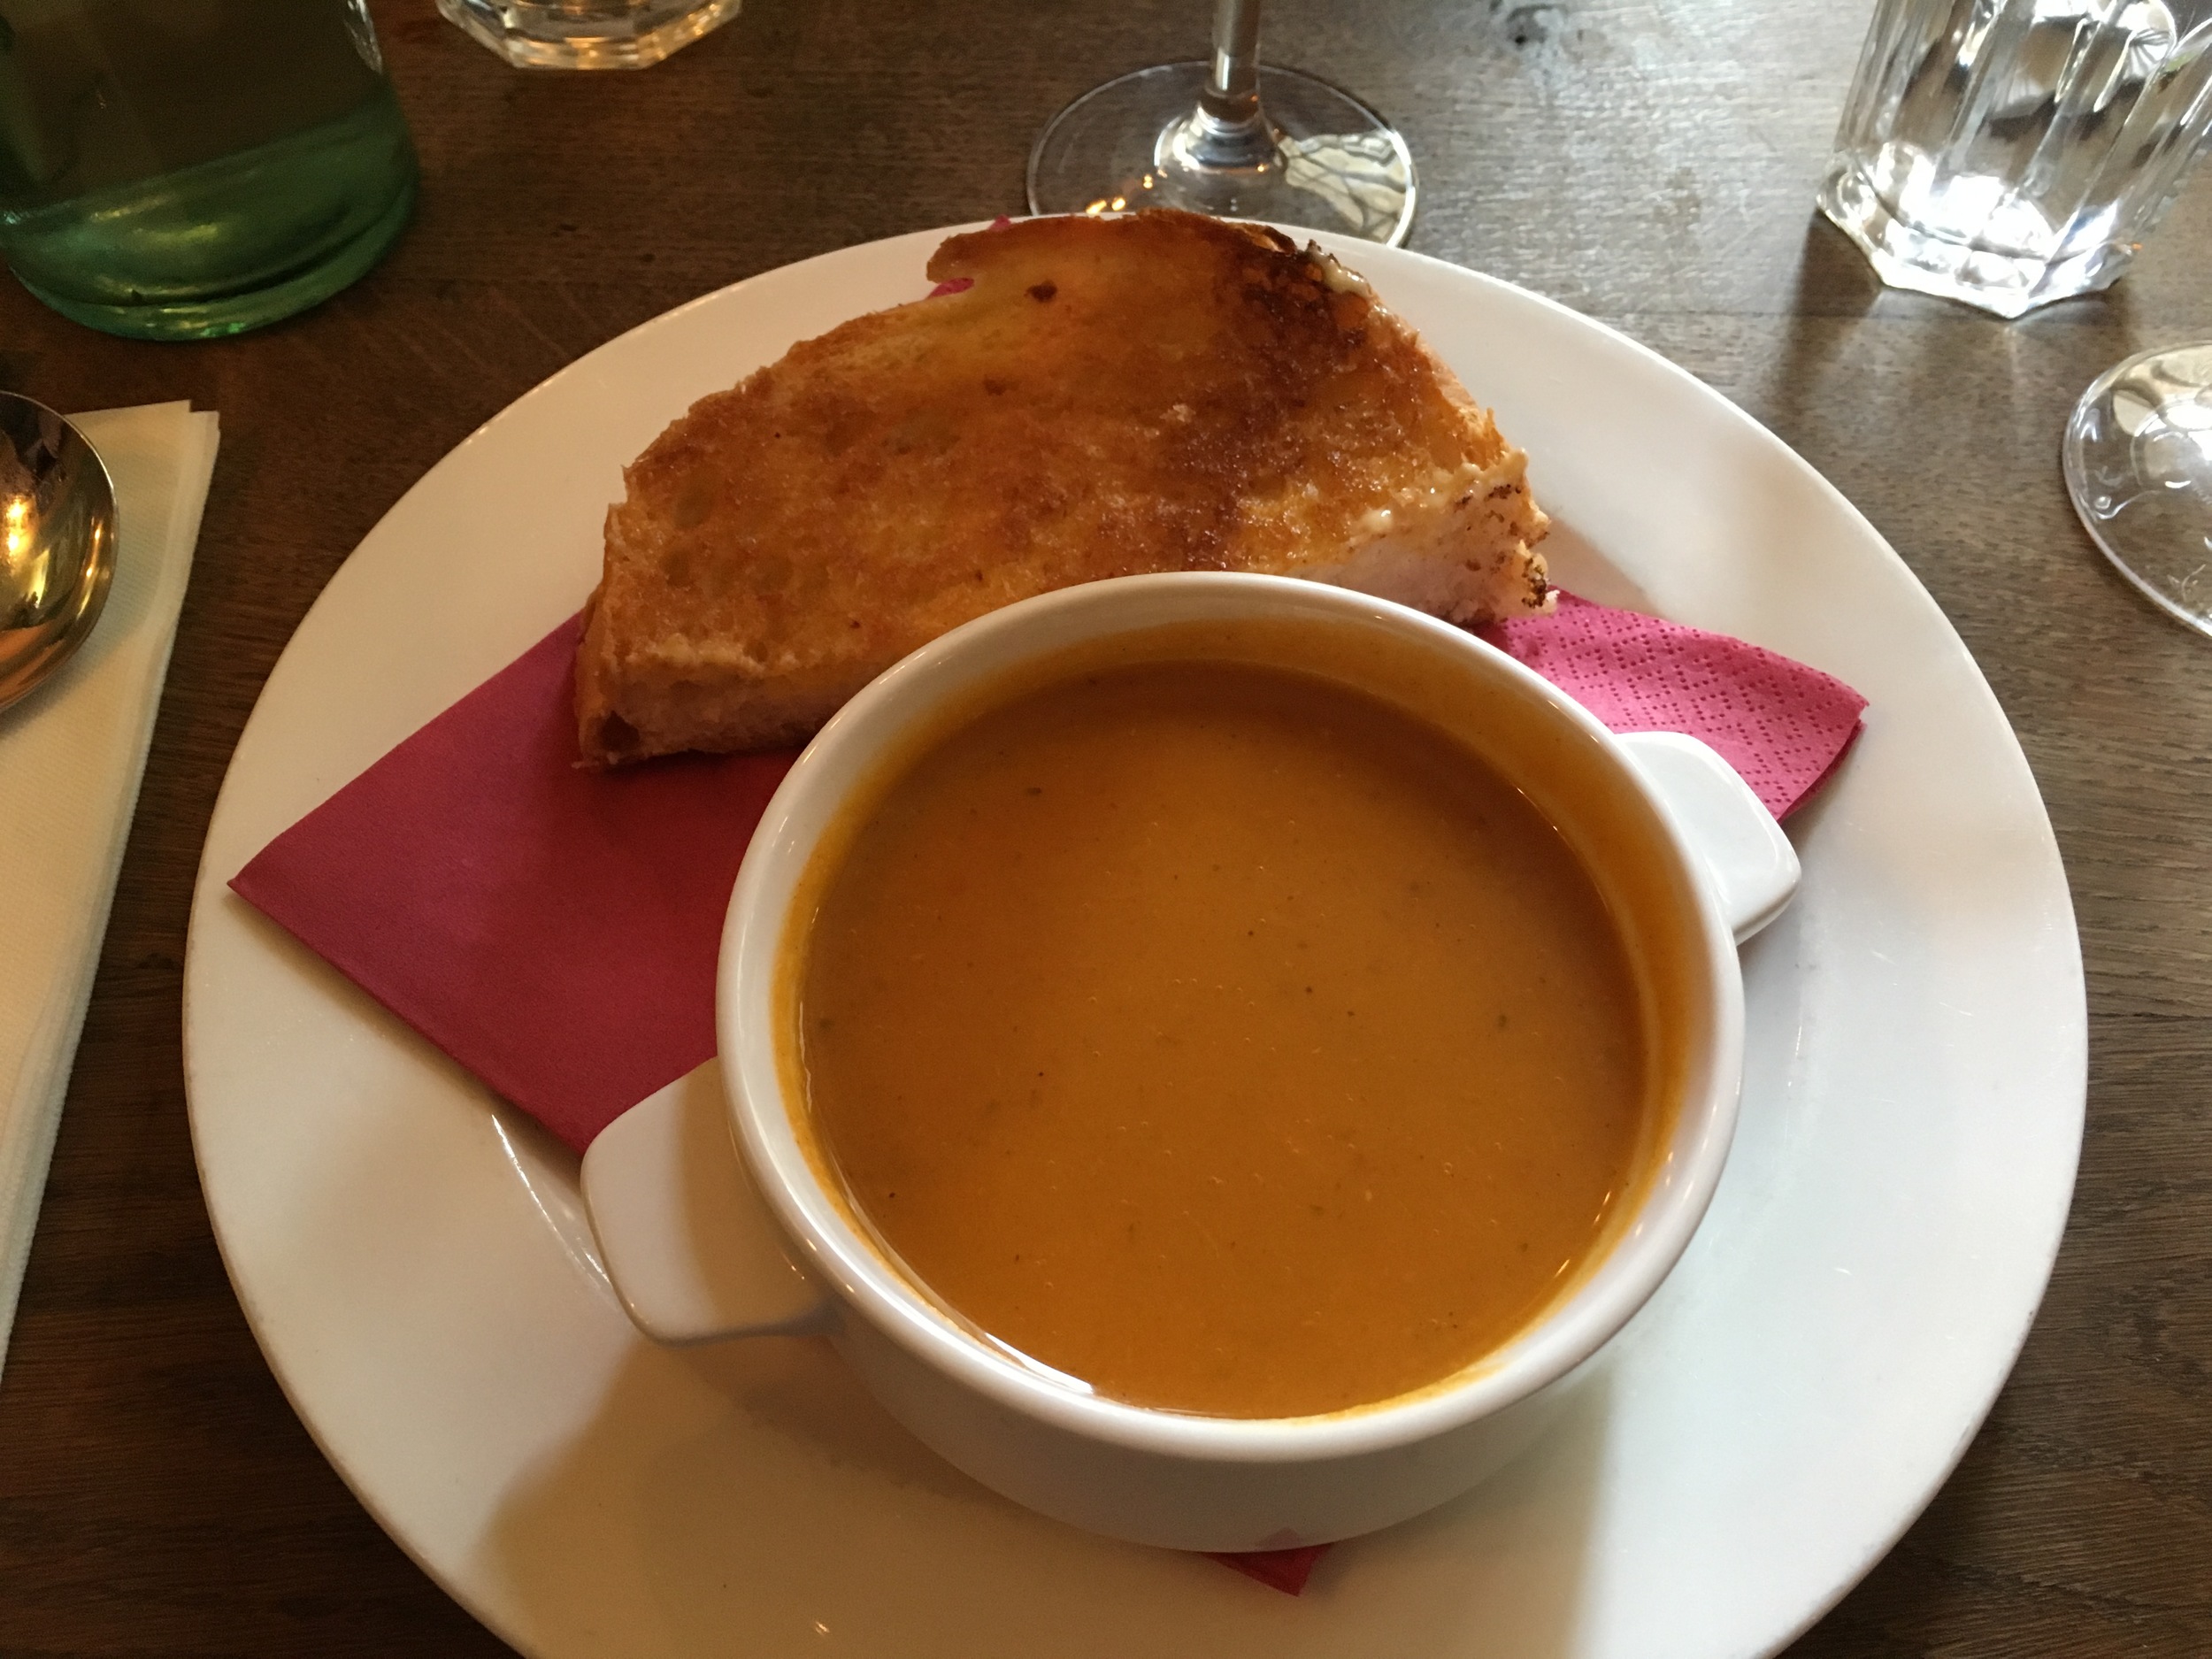  Soup with a nice slice of a Sally Lunn bun. Most of the appetizers and entrees include a slice of a Sally Lunn bun (not enough in my opinion, but an entire bun would be too much). 